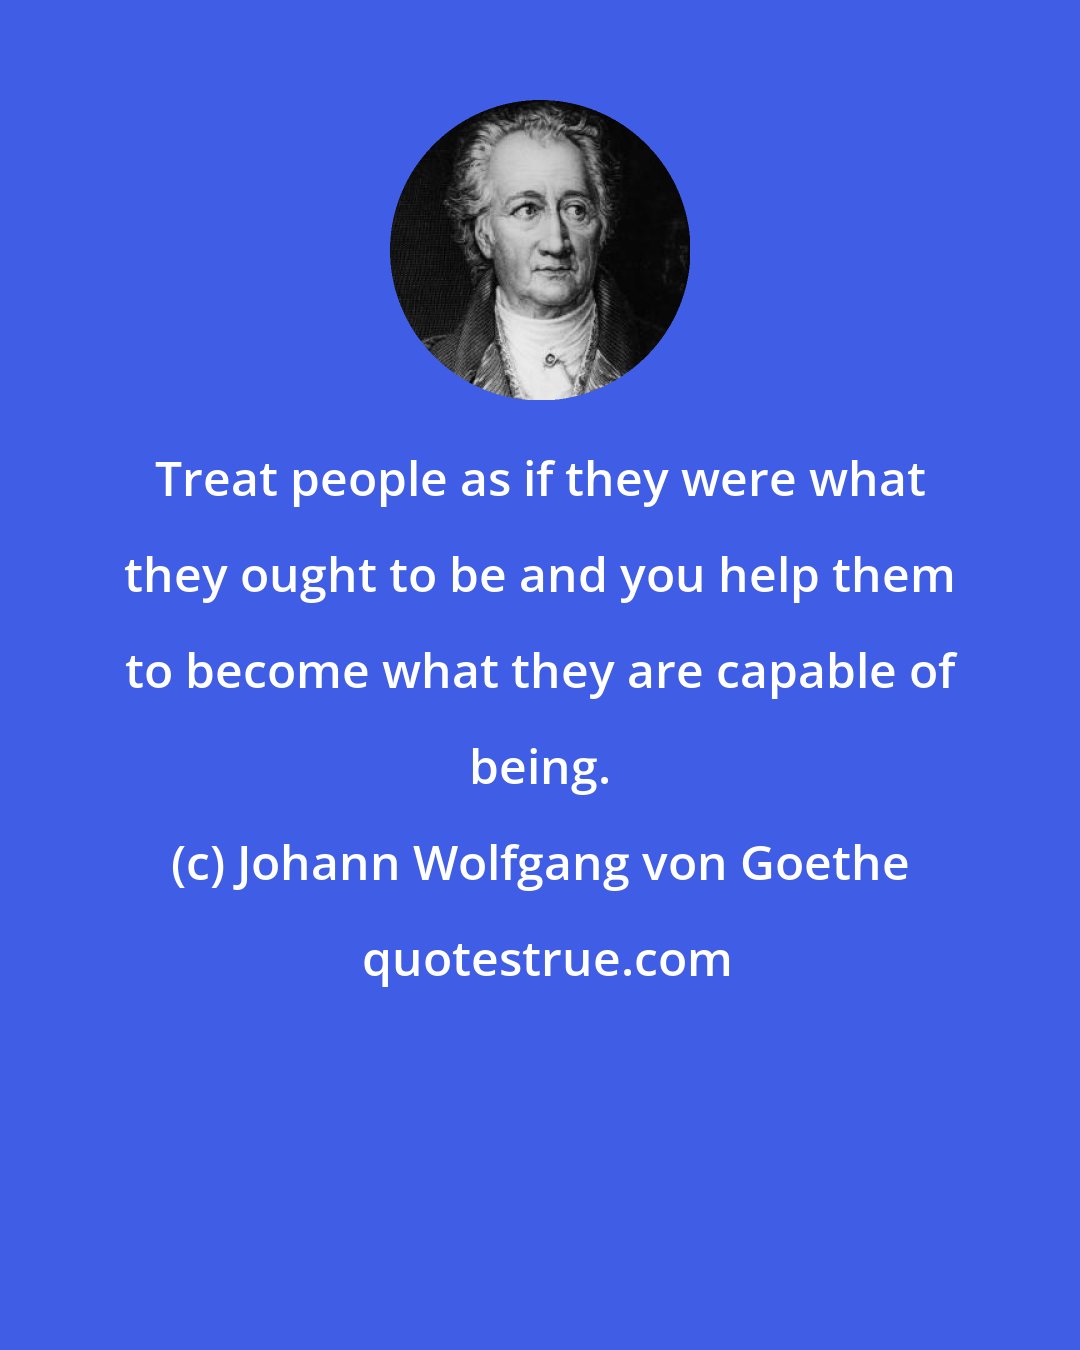 Johann Wolfgang von Goethe: Treat people as if they were what they ought to be and you help them to become what they are capable of being.